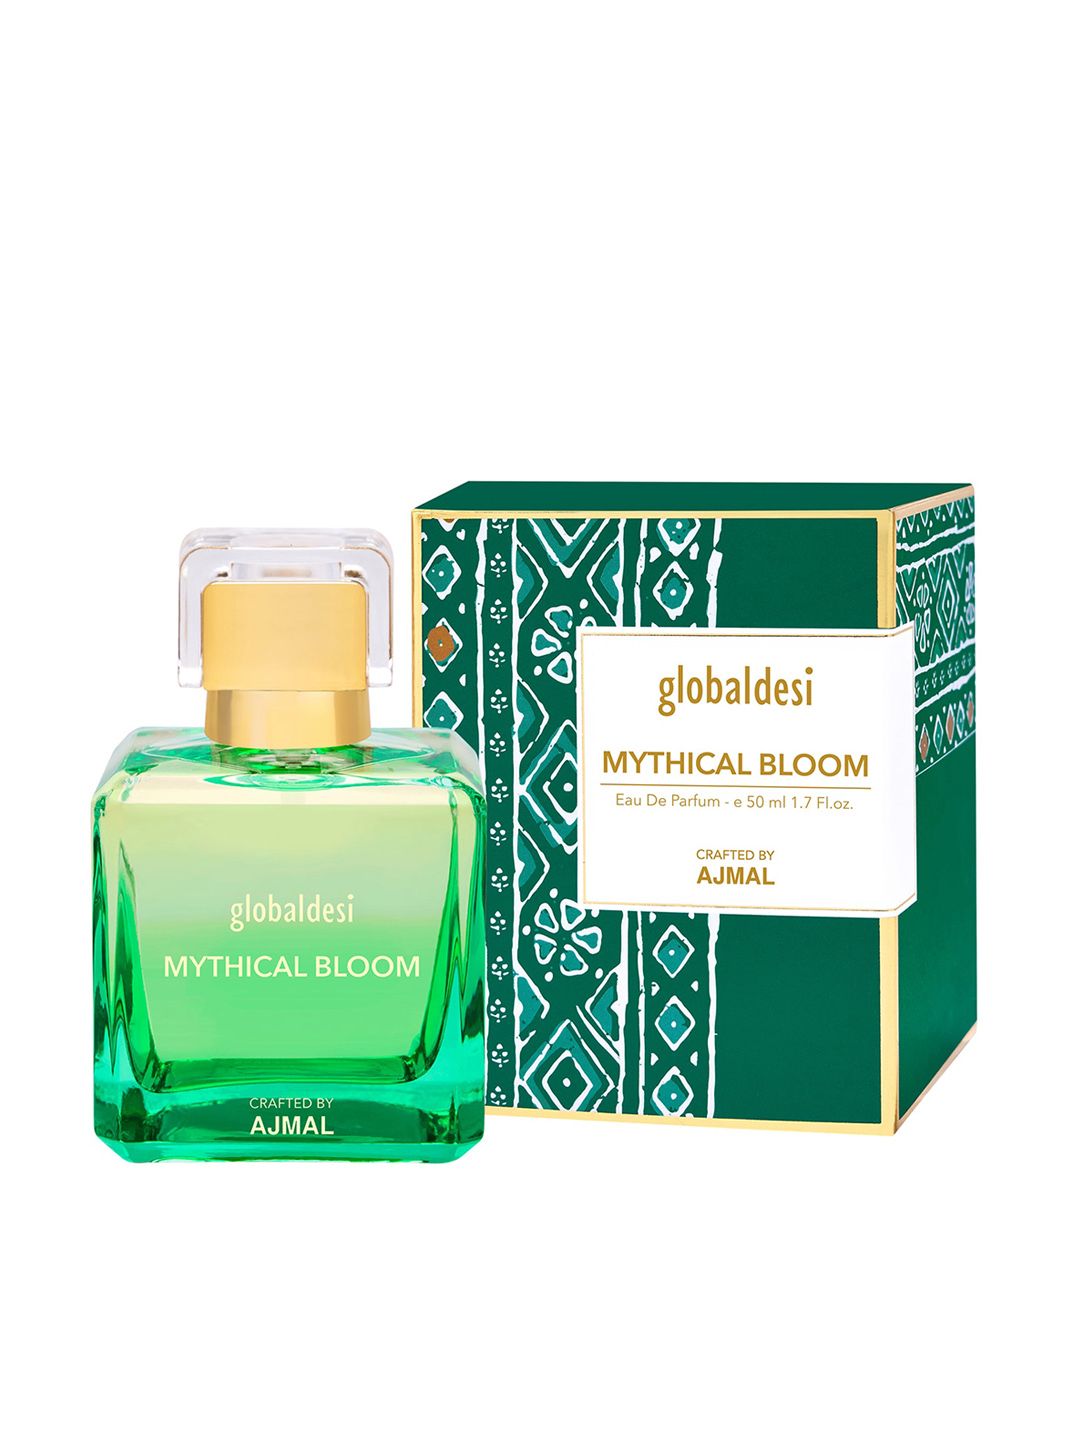 Global Desi For Women MYTHICAL BLOOM EDP Crafted By Ajmal 50 ml Price in India